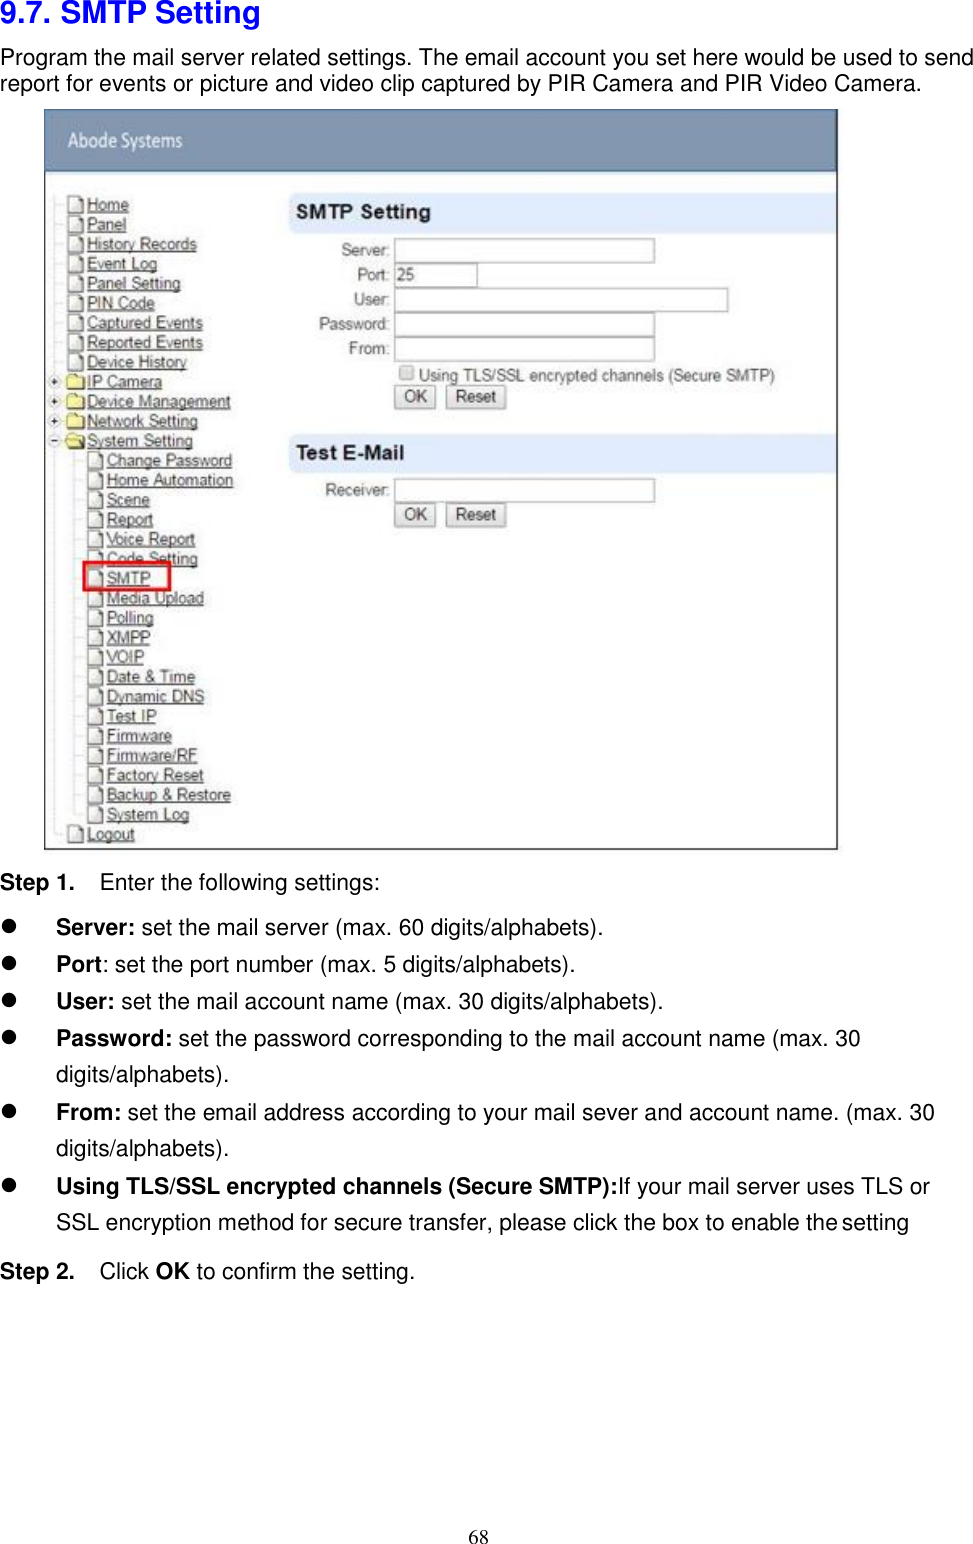 68  9.7. SMTP Setting Program the mail server related settings. The email account you set here would be used to send report for events or picture and video clip captured by PIR Camera and PIR Video Camera.          Step 1. Enter the following settings:  Server: set the mail server (max. 60 digits/alphabets). Port: set the port number (max. 5 digits/alphabets). User: set the mail account name (max. 30 digits/alphabets). Password: set the password corresponding to the mail account name (max. 30 digits/alphabets). From: set the email address according to your mail sever and account name. (max. 30 digits/alphabets). Using TLS/SSL encrypted channels (Secure SMTP):If your mail server uses TLS or SSL encryption method for secure transfer, please click the box to enable the settingStep 2. Click OK to confirm the setting. 